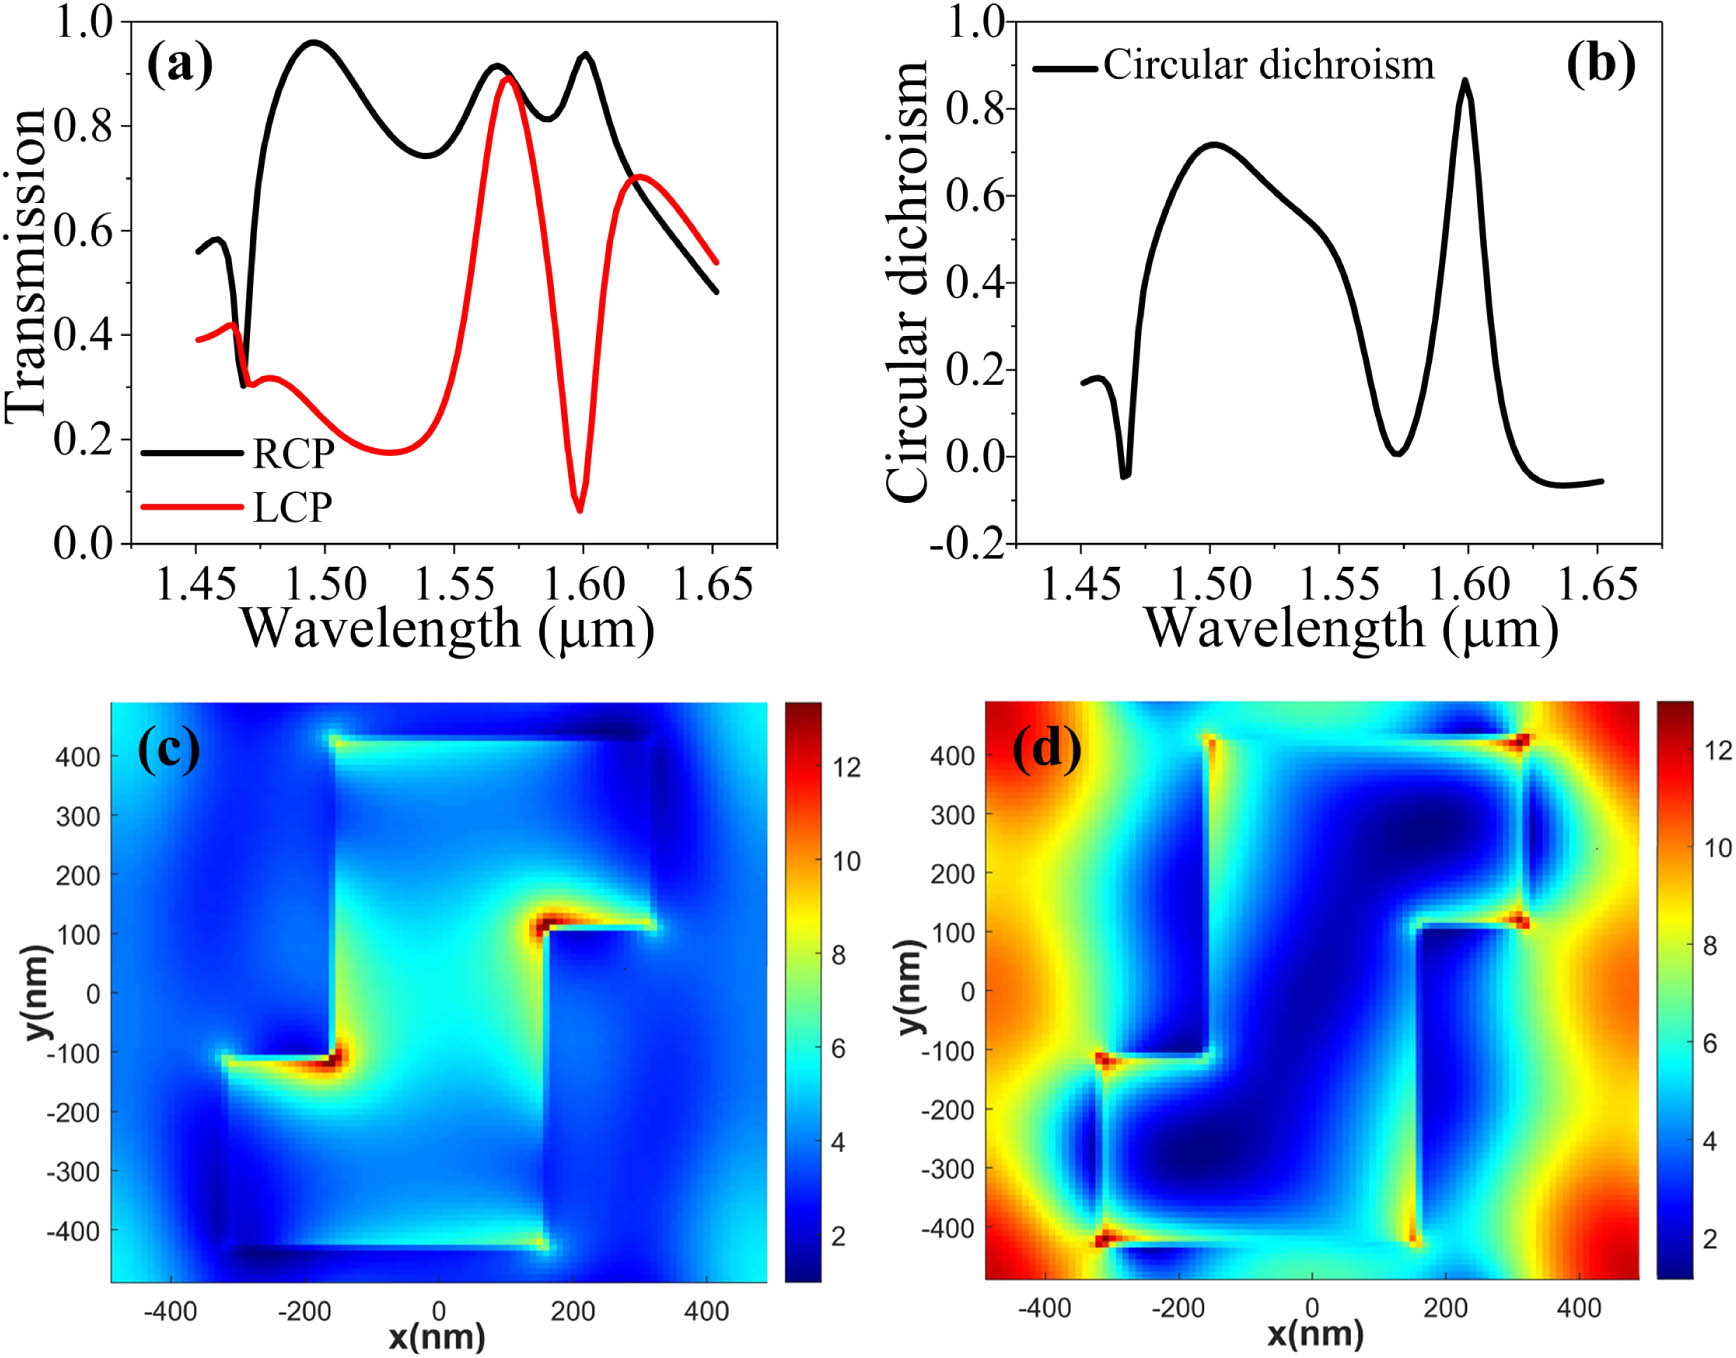 Simulation performances of the CP filters. (a) Transmission spectra of the CP filter for RCP (black) and LCP (red) light as the parameters of the Z-shaped pattern are as follows: W1=0.32 μm, L1=0.22 μm, L2=0.48 μm, H=0.22 μm, and P=0.98 μm. (b) The corresponding CD of the CP filter. The electric field cross section diagram at H=0.2 μm for (c) RCP light and (d) LCP light at the wavelength of 1.6 μm.